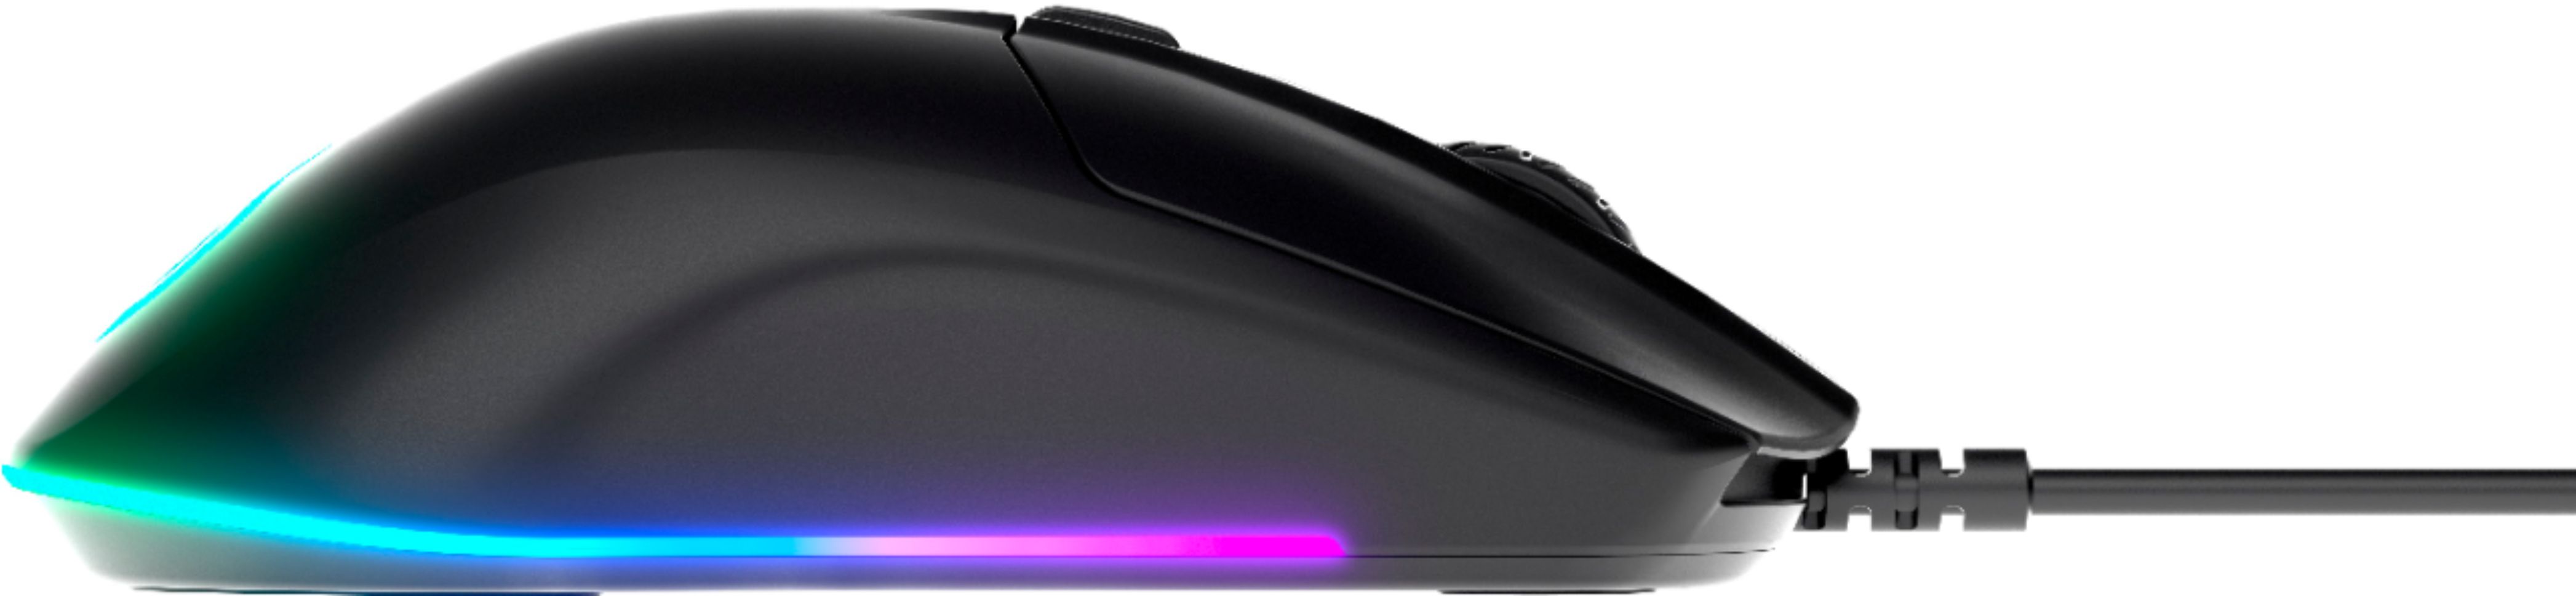 Mouse SteelSeries Rival 3 Negro Mate